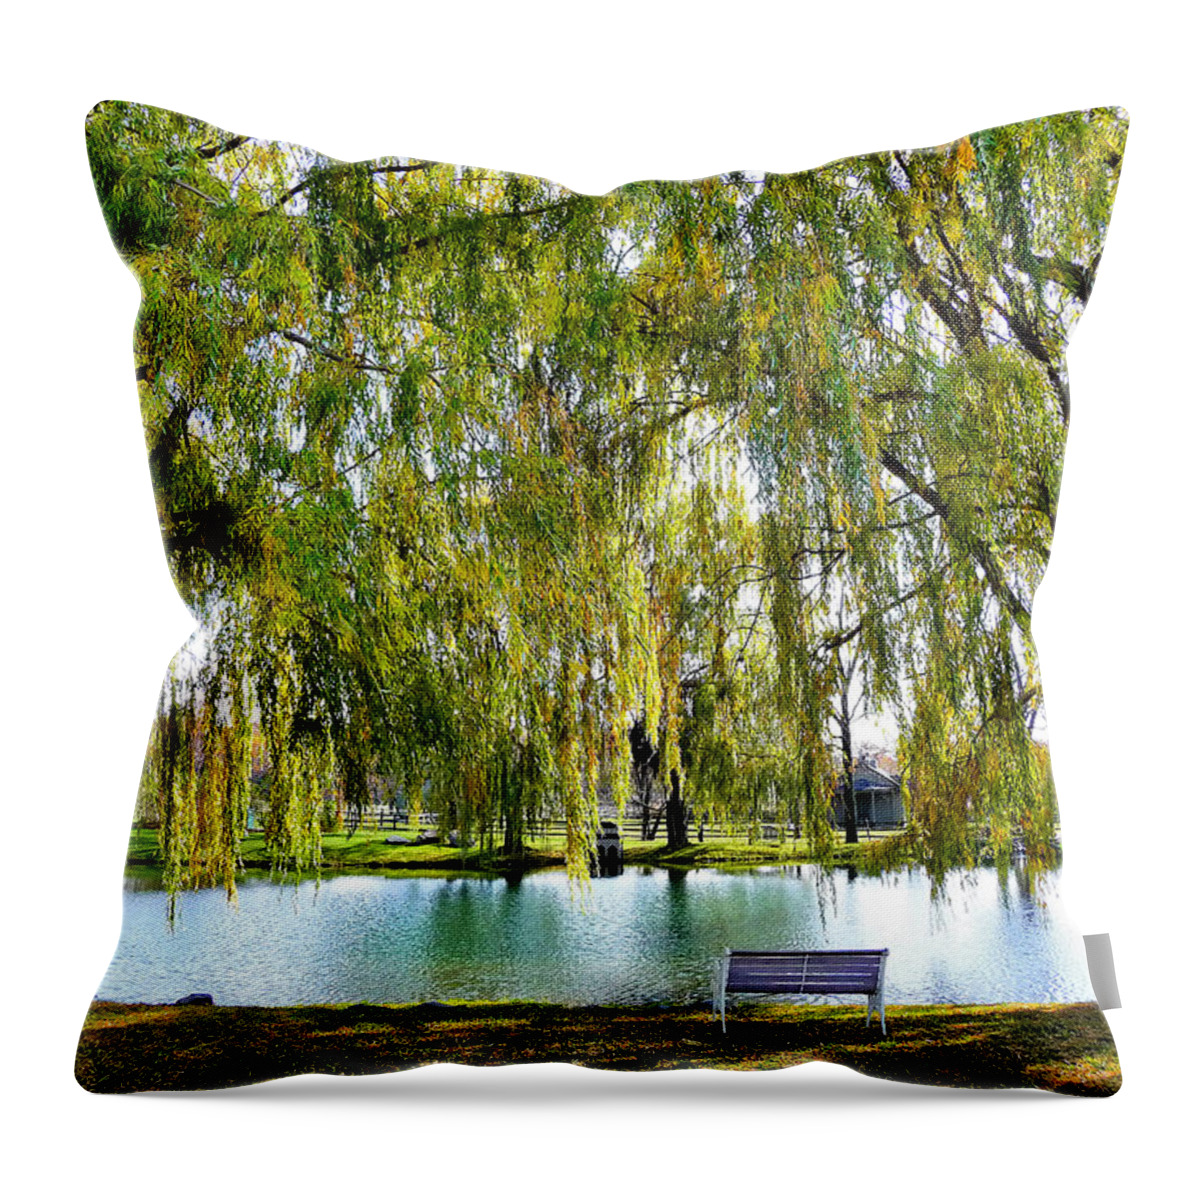 Finger Lakes Throw Pillow featuring the photograph Finger Lakes Weeping Willows by Mitchell R Grosky